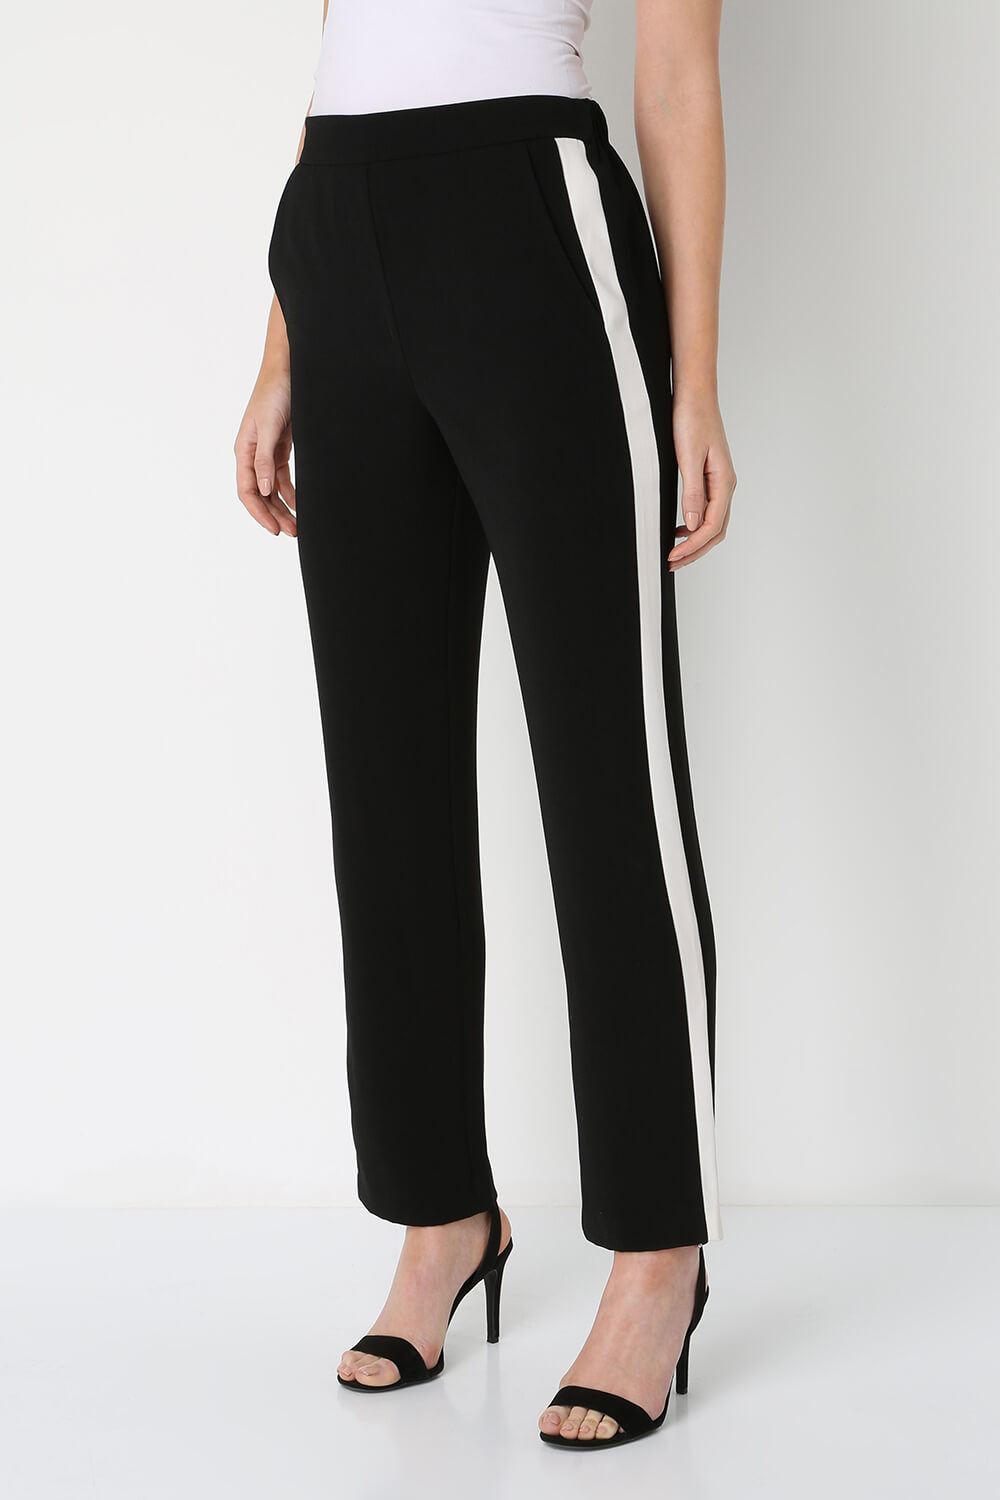 Buy Long Tall Sally Black Wide Leg Side Stripe Trousers from Next USA